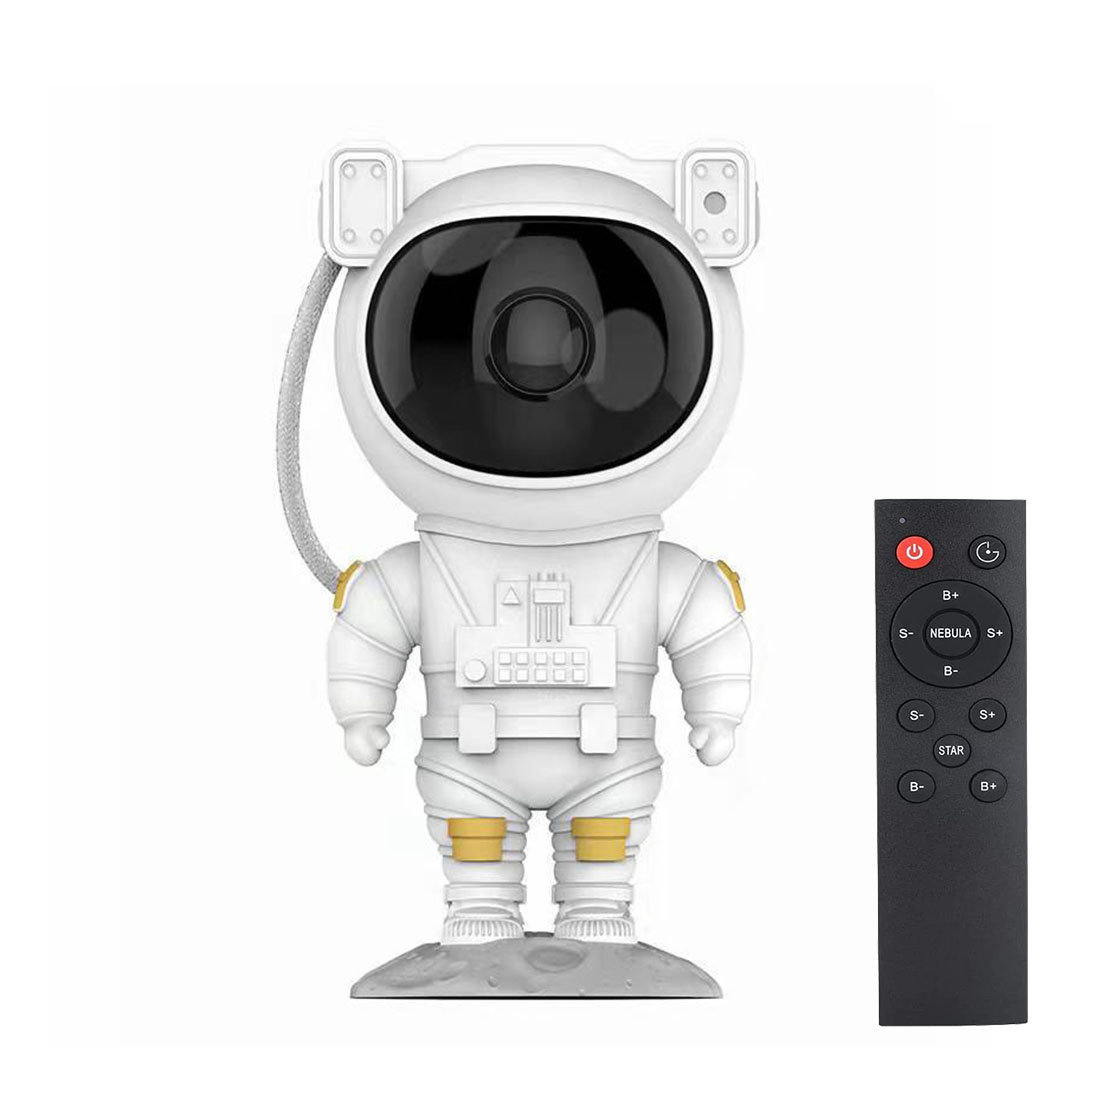 Astronaut Space Projector Star Galaxy Night Light - Led With Remote Control  In-built Battery 2400mah at Rs 560/piece, LED Night Light in Surat